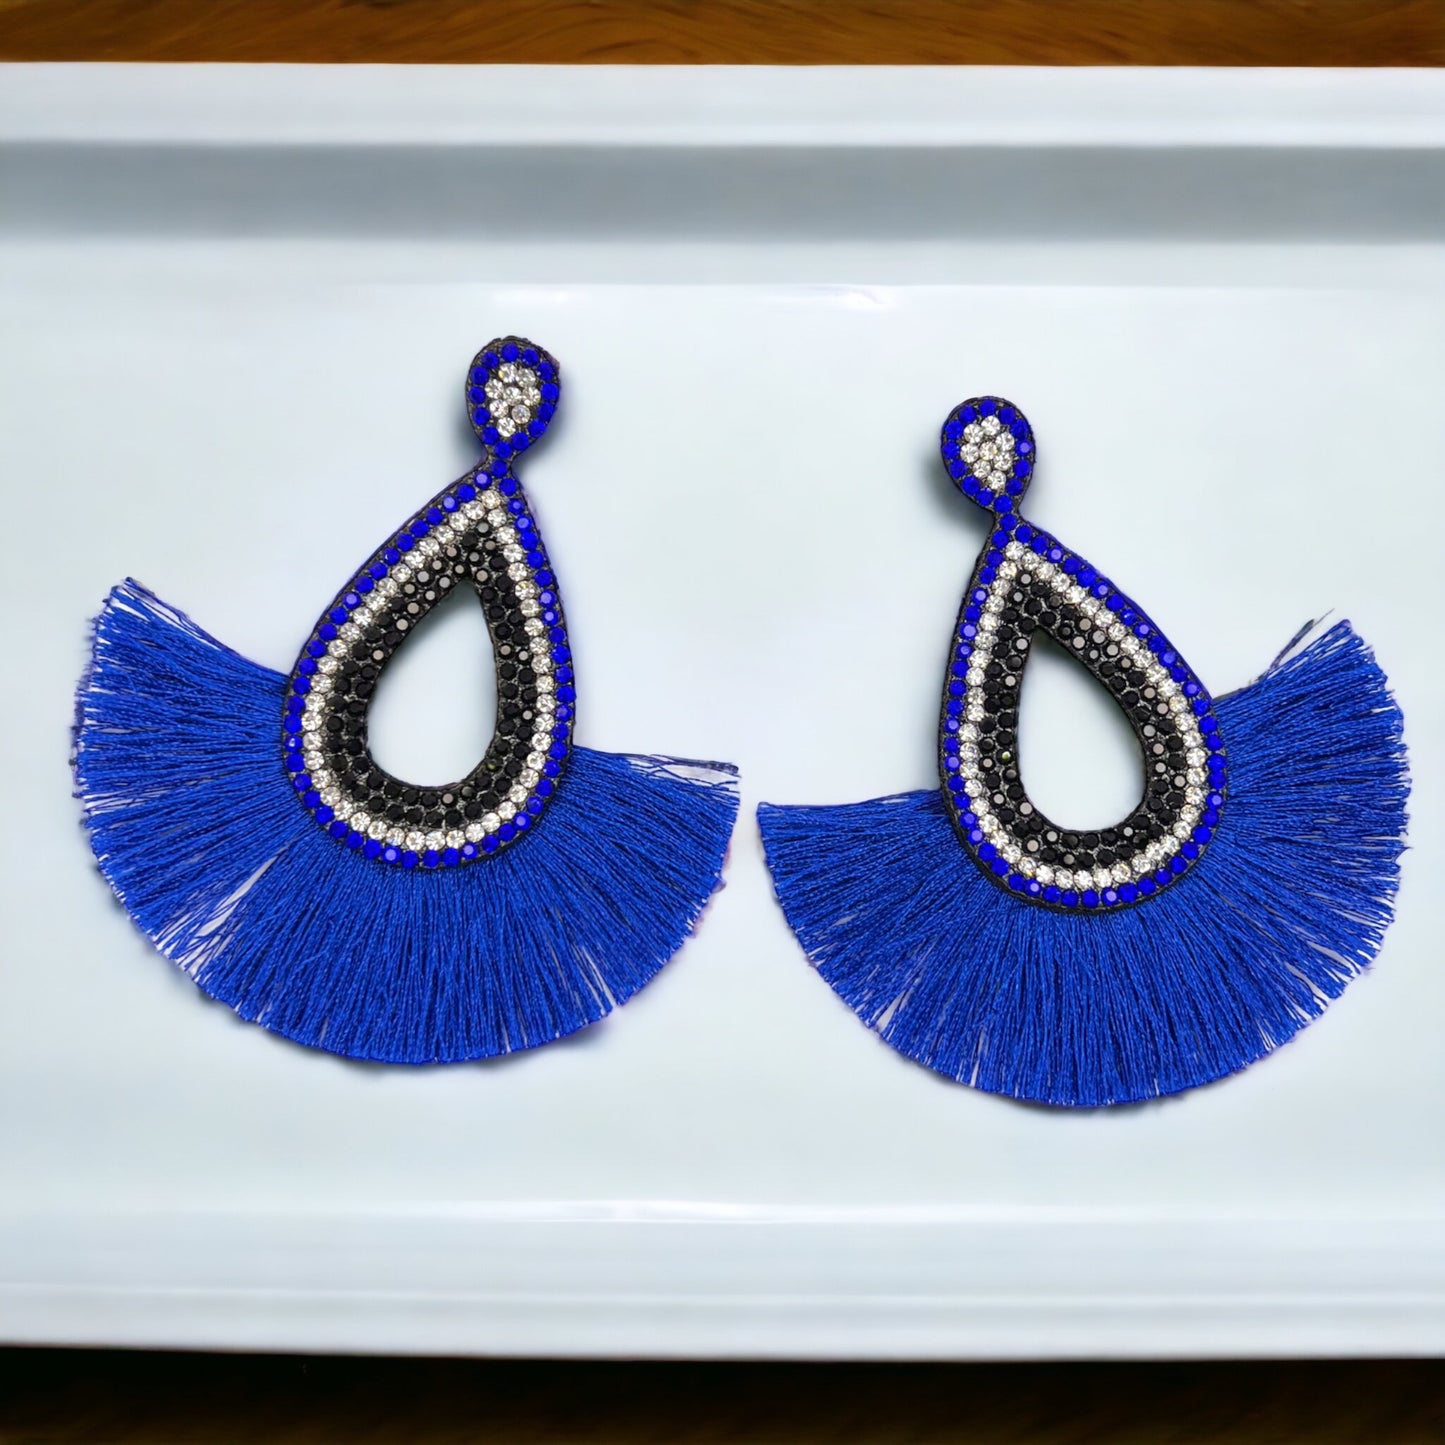 Blue and Black Earrings - Blue Accessories, Rhinestone Earrings, Blue and White Rhinestones, Fringe Earrings